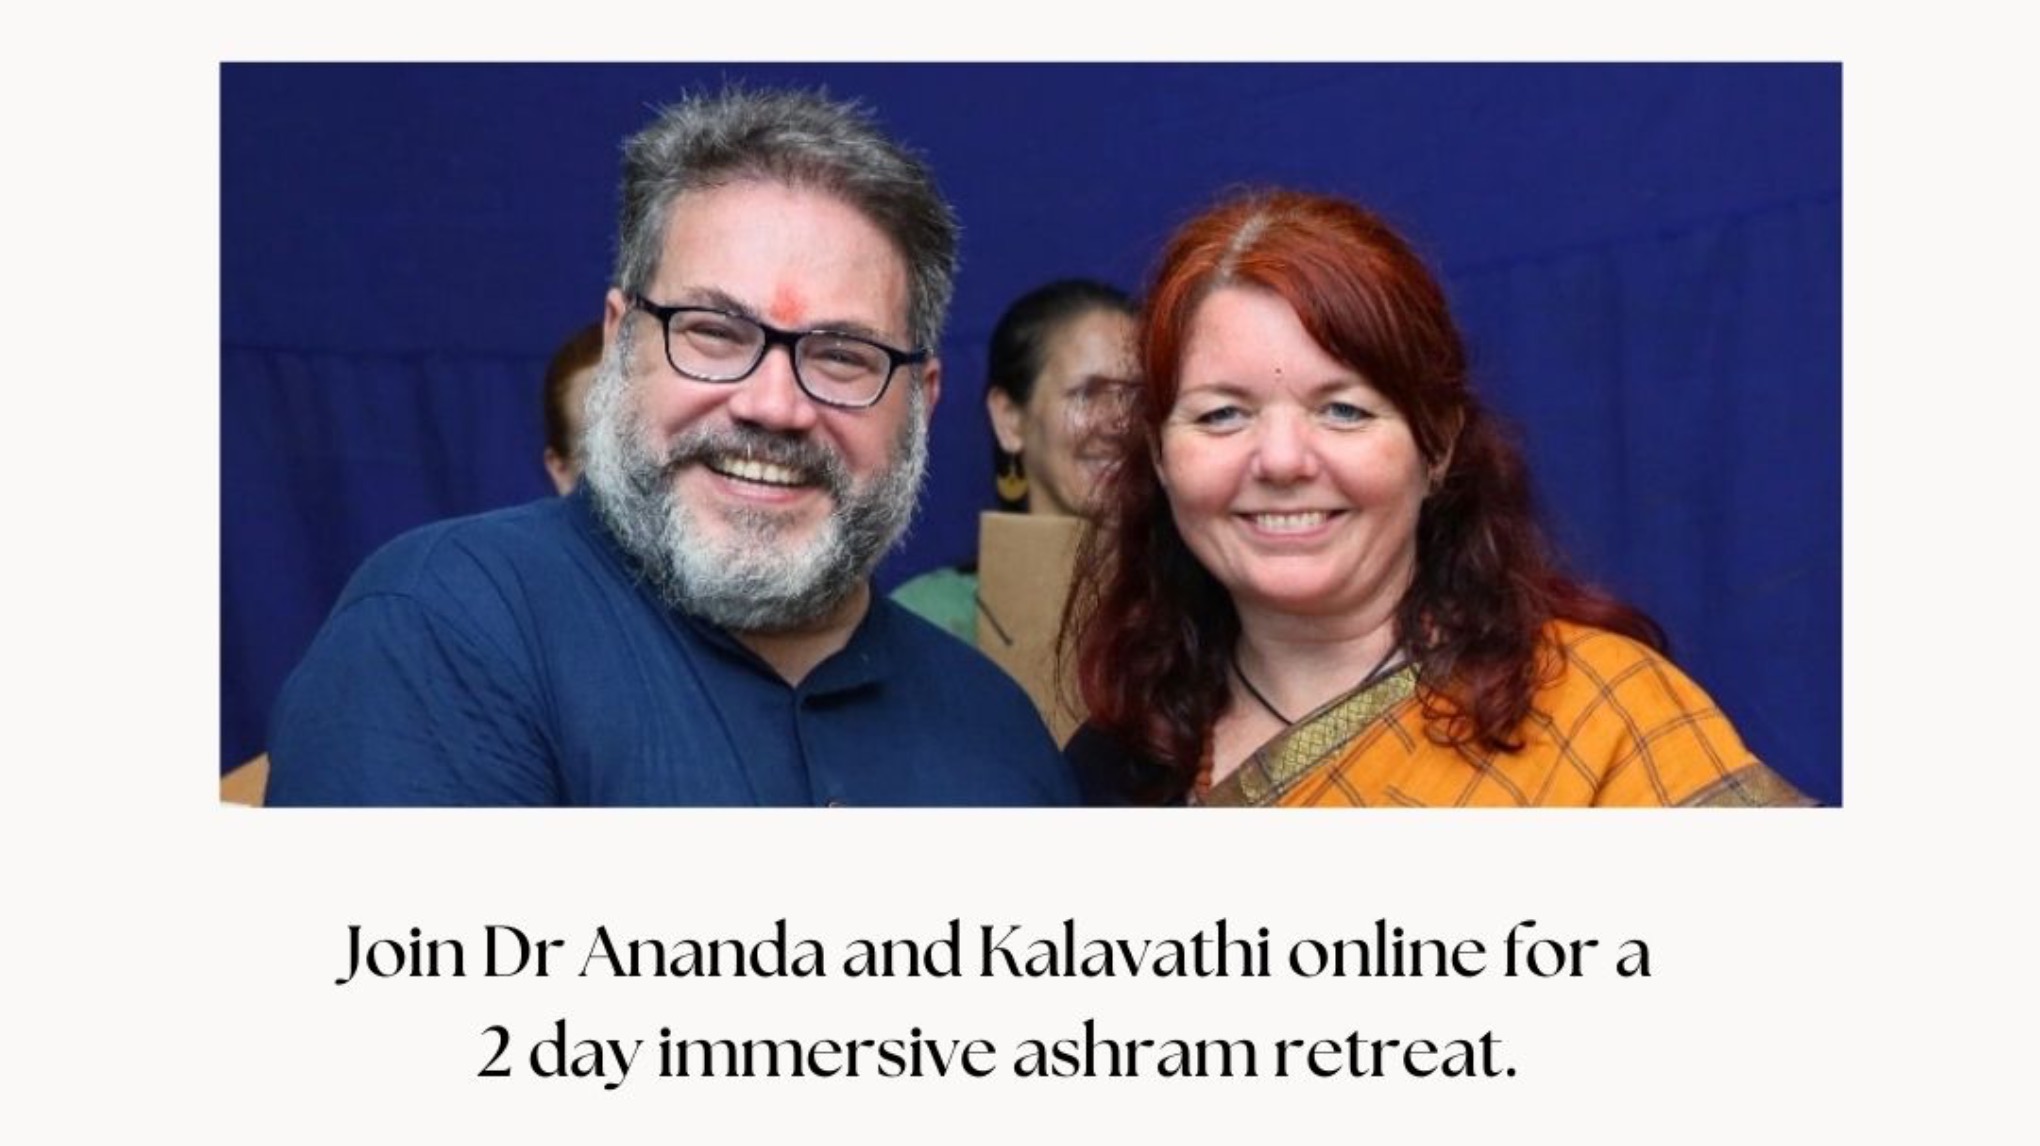 Online Yoga Retreat with Dr Ananda and Kalavathi